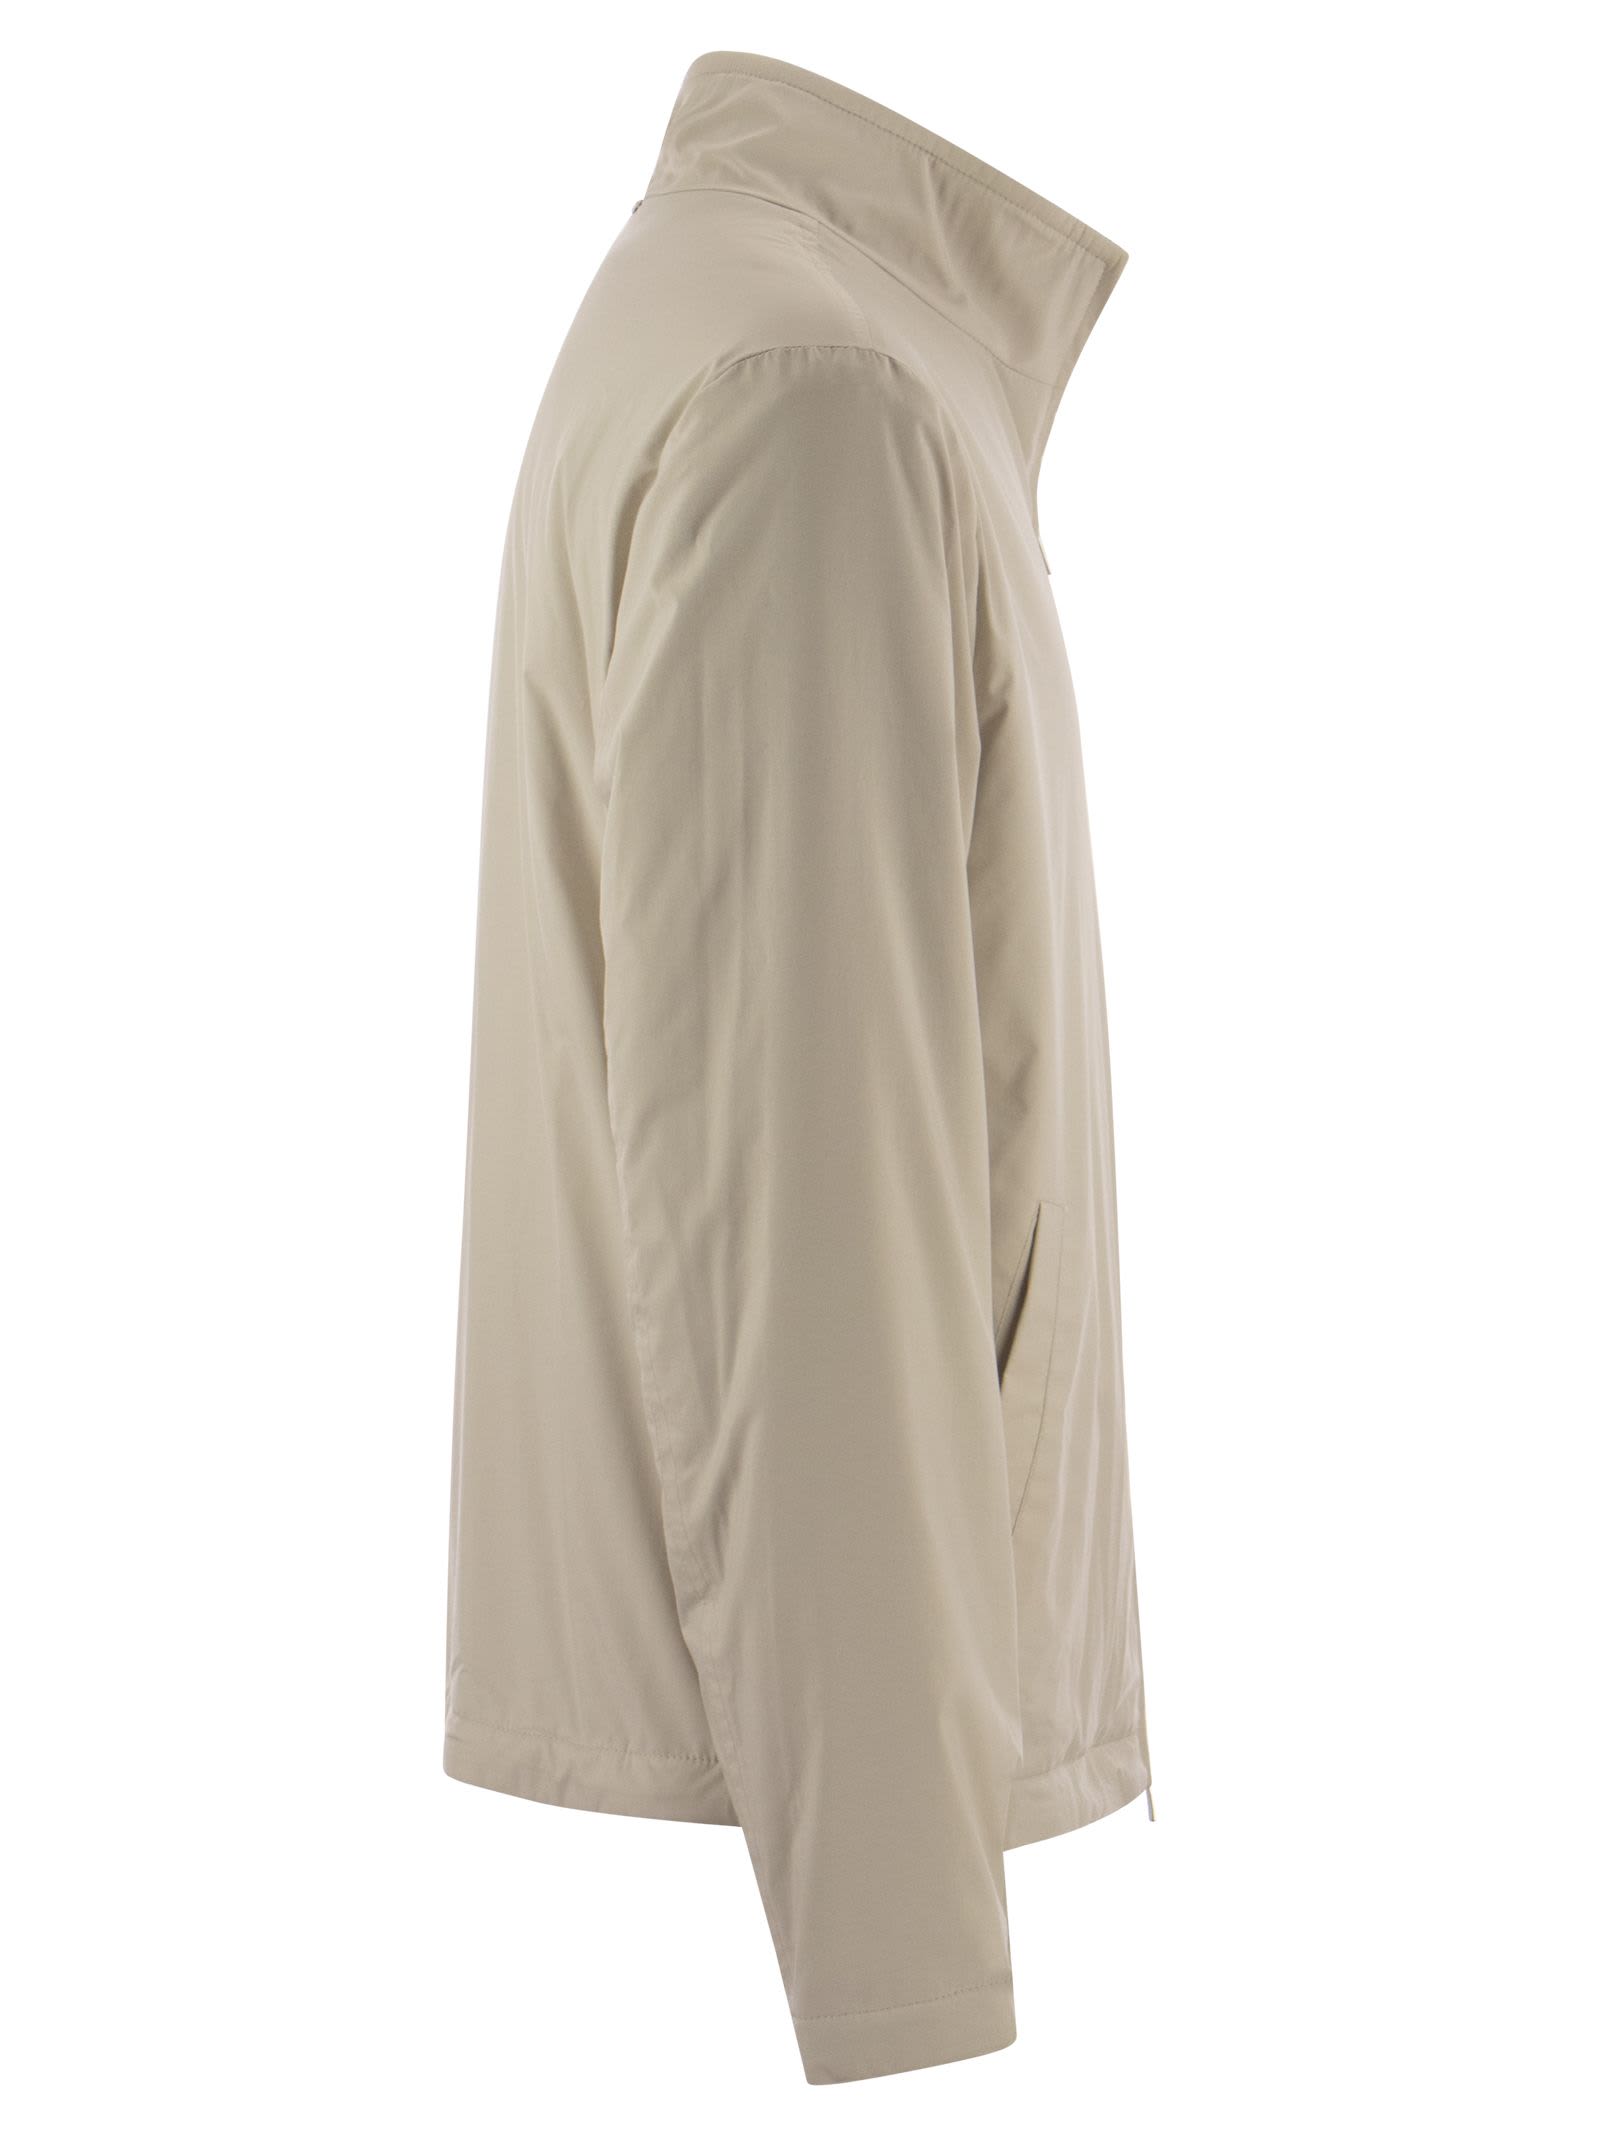 Shop Fedeli Cashmere Lined Jacket In Cream/grey